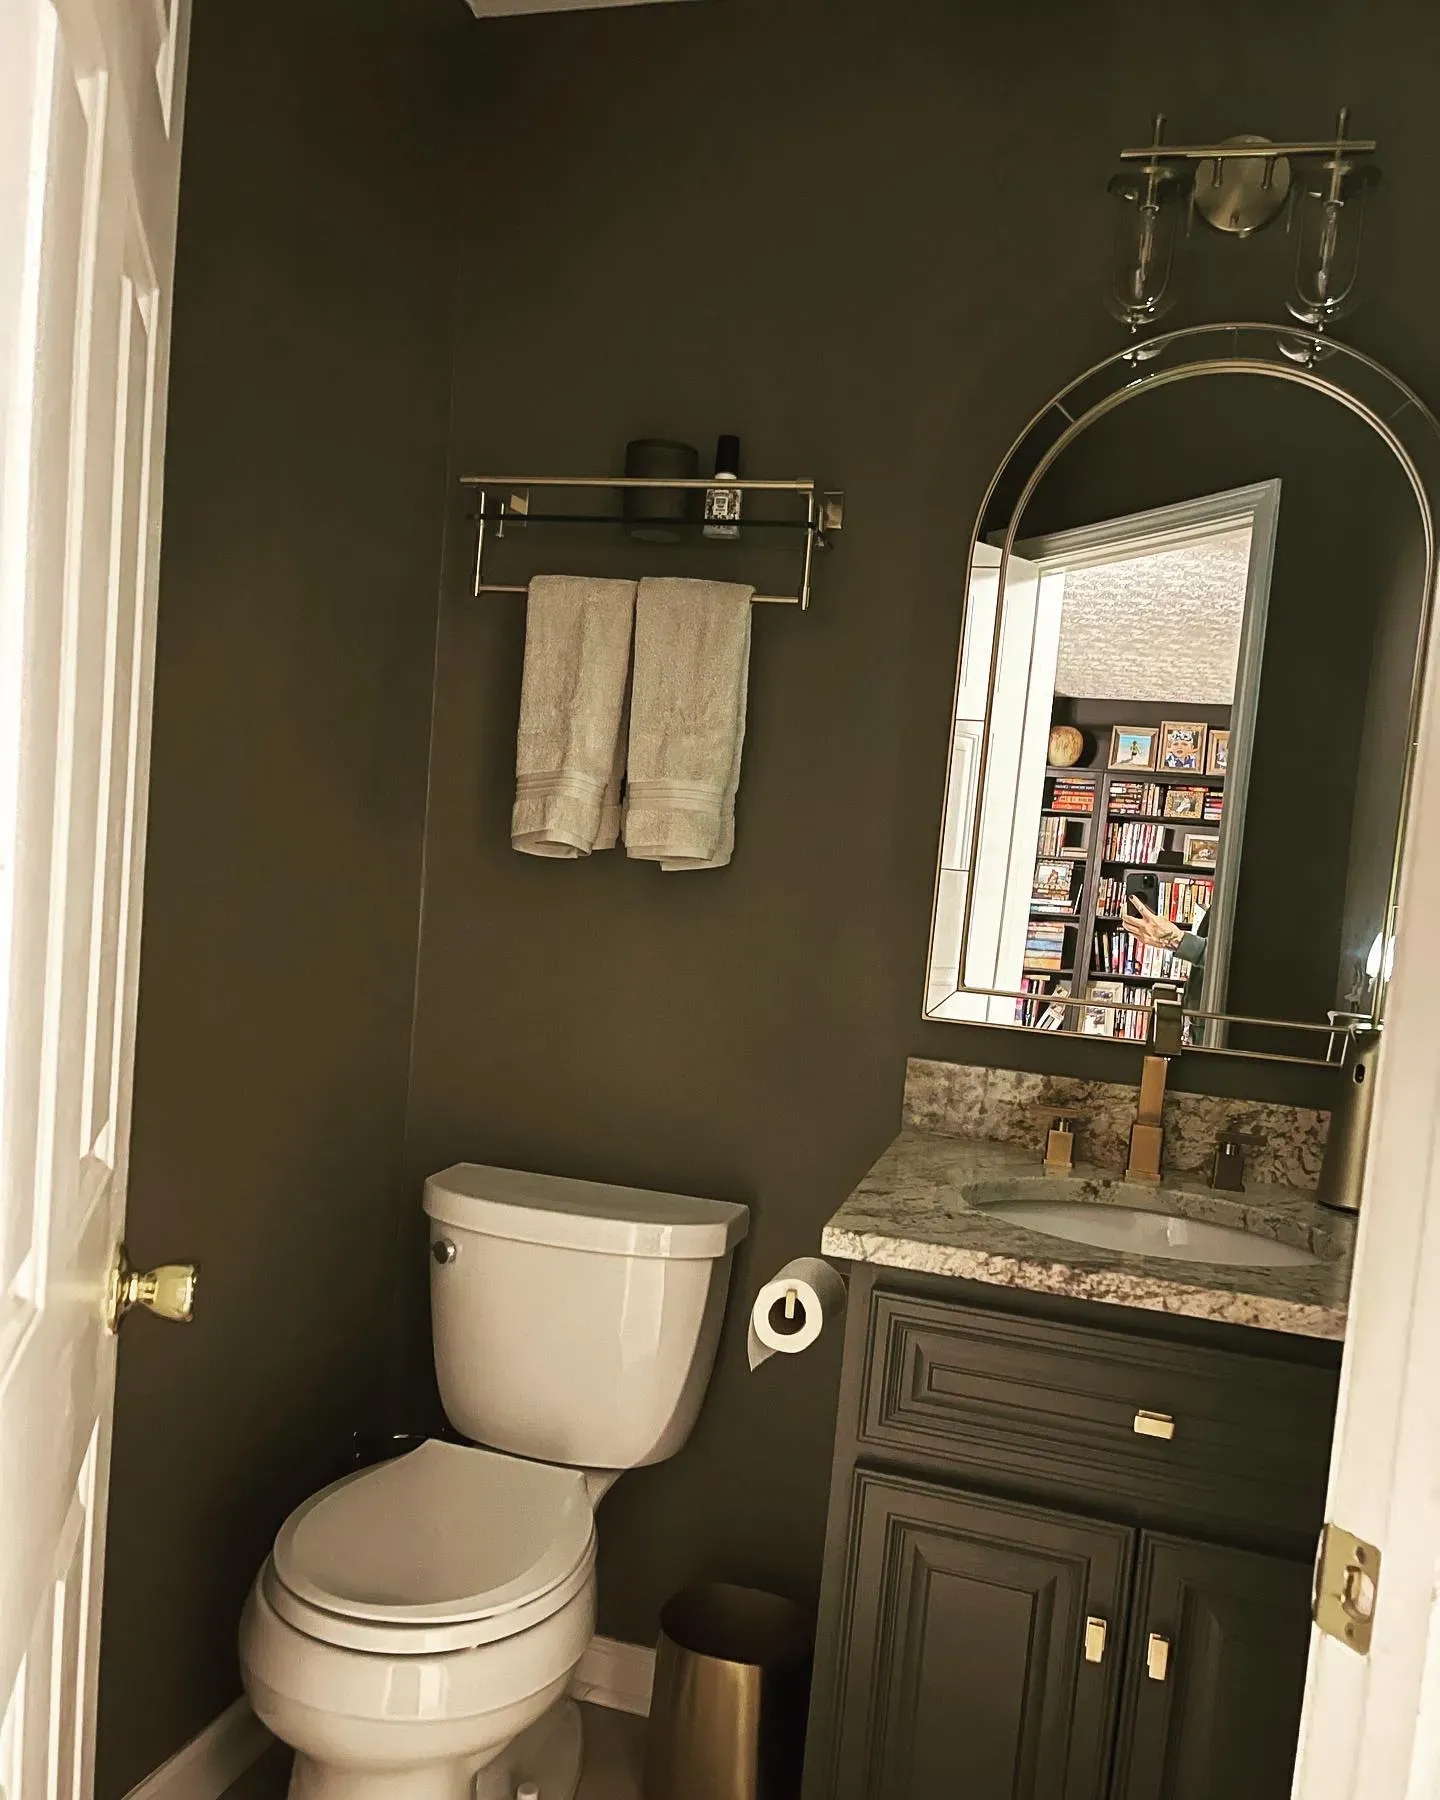 Behr Night Mission bathroom review